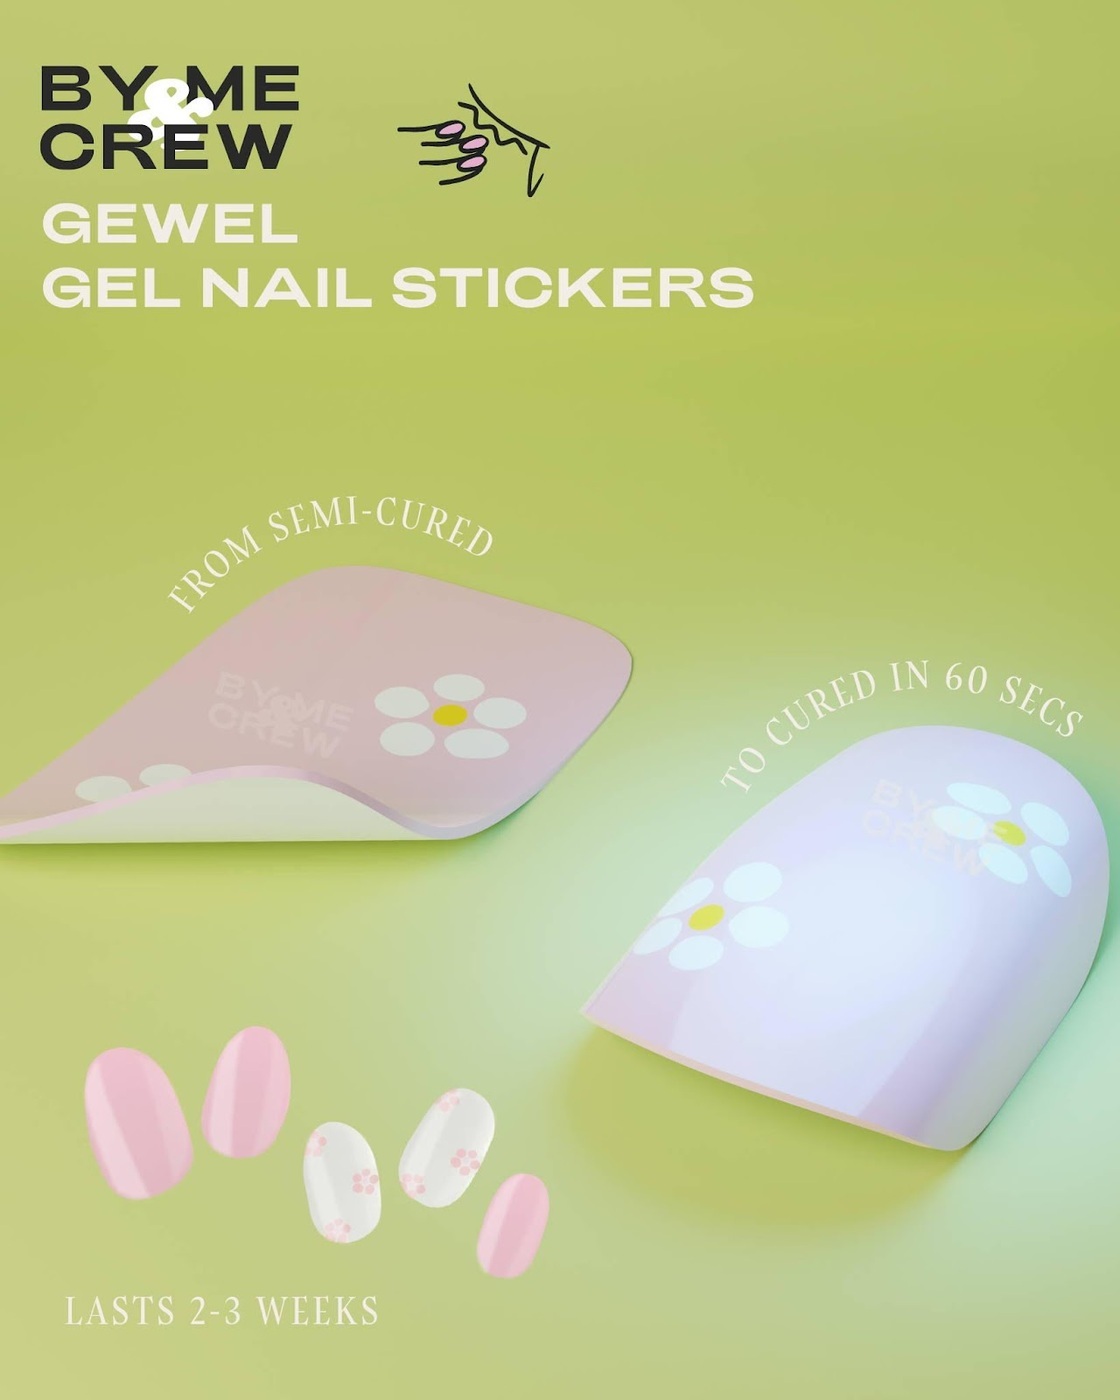 By Me and Crew is an Australian-based manufacturer and supplier of gel nail stickers that are semi-cured and backed by the latest technology in the nail industry.